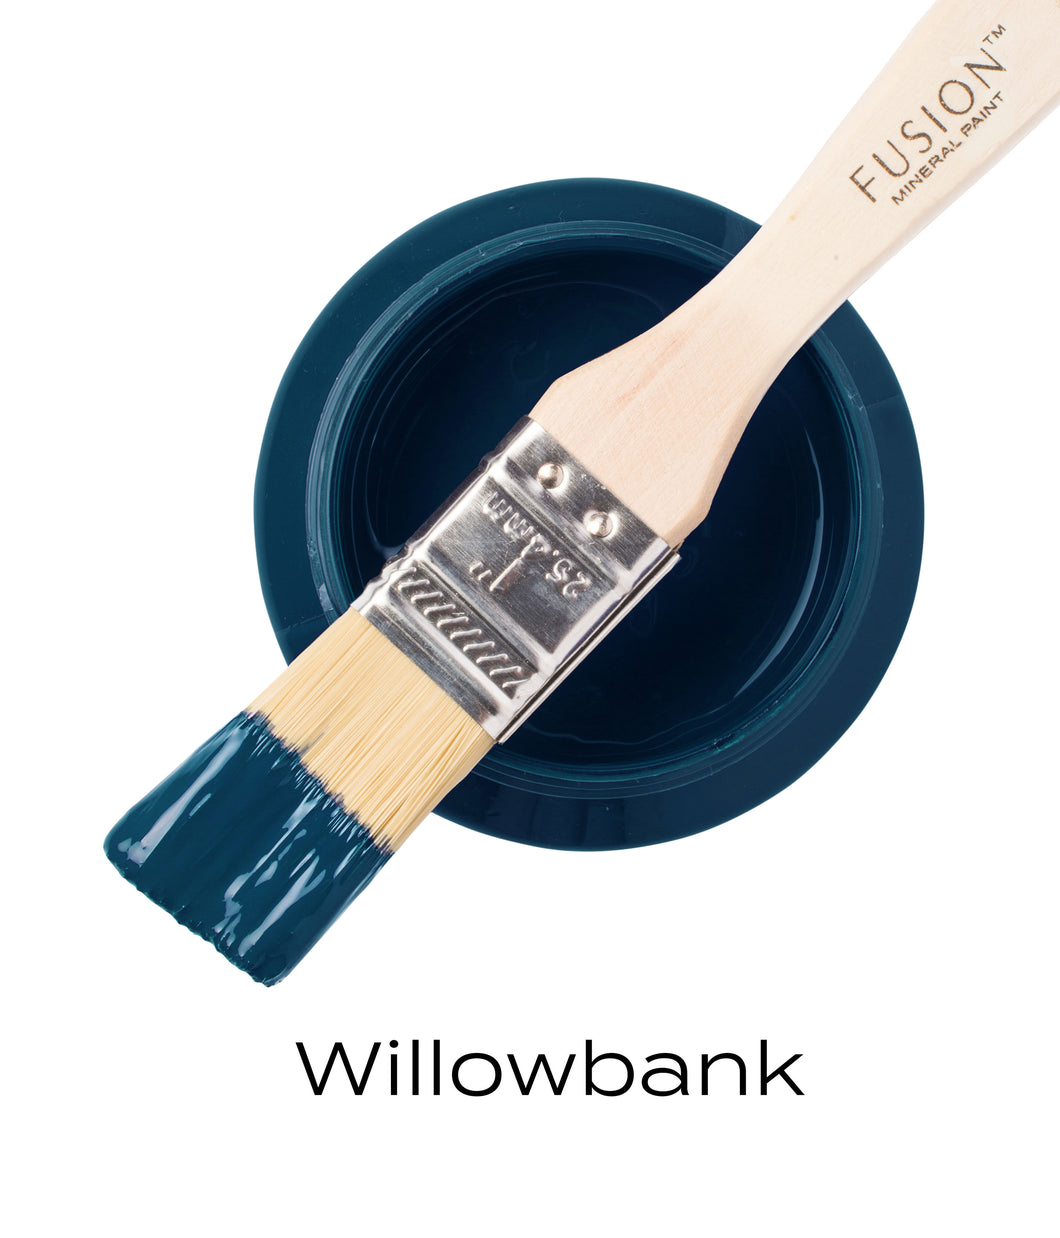 Fusion Mineral Paint Willowbank 500g